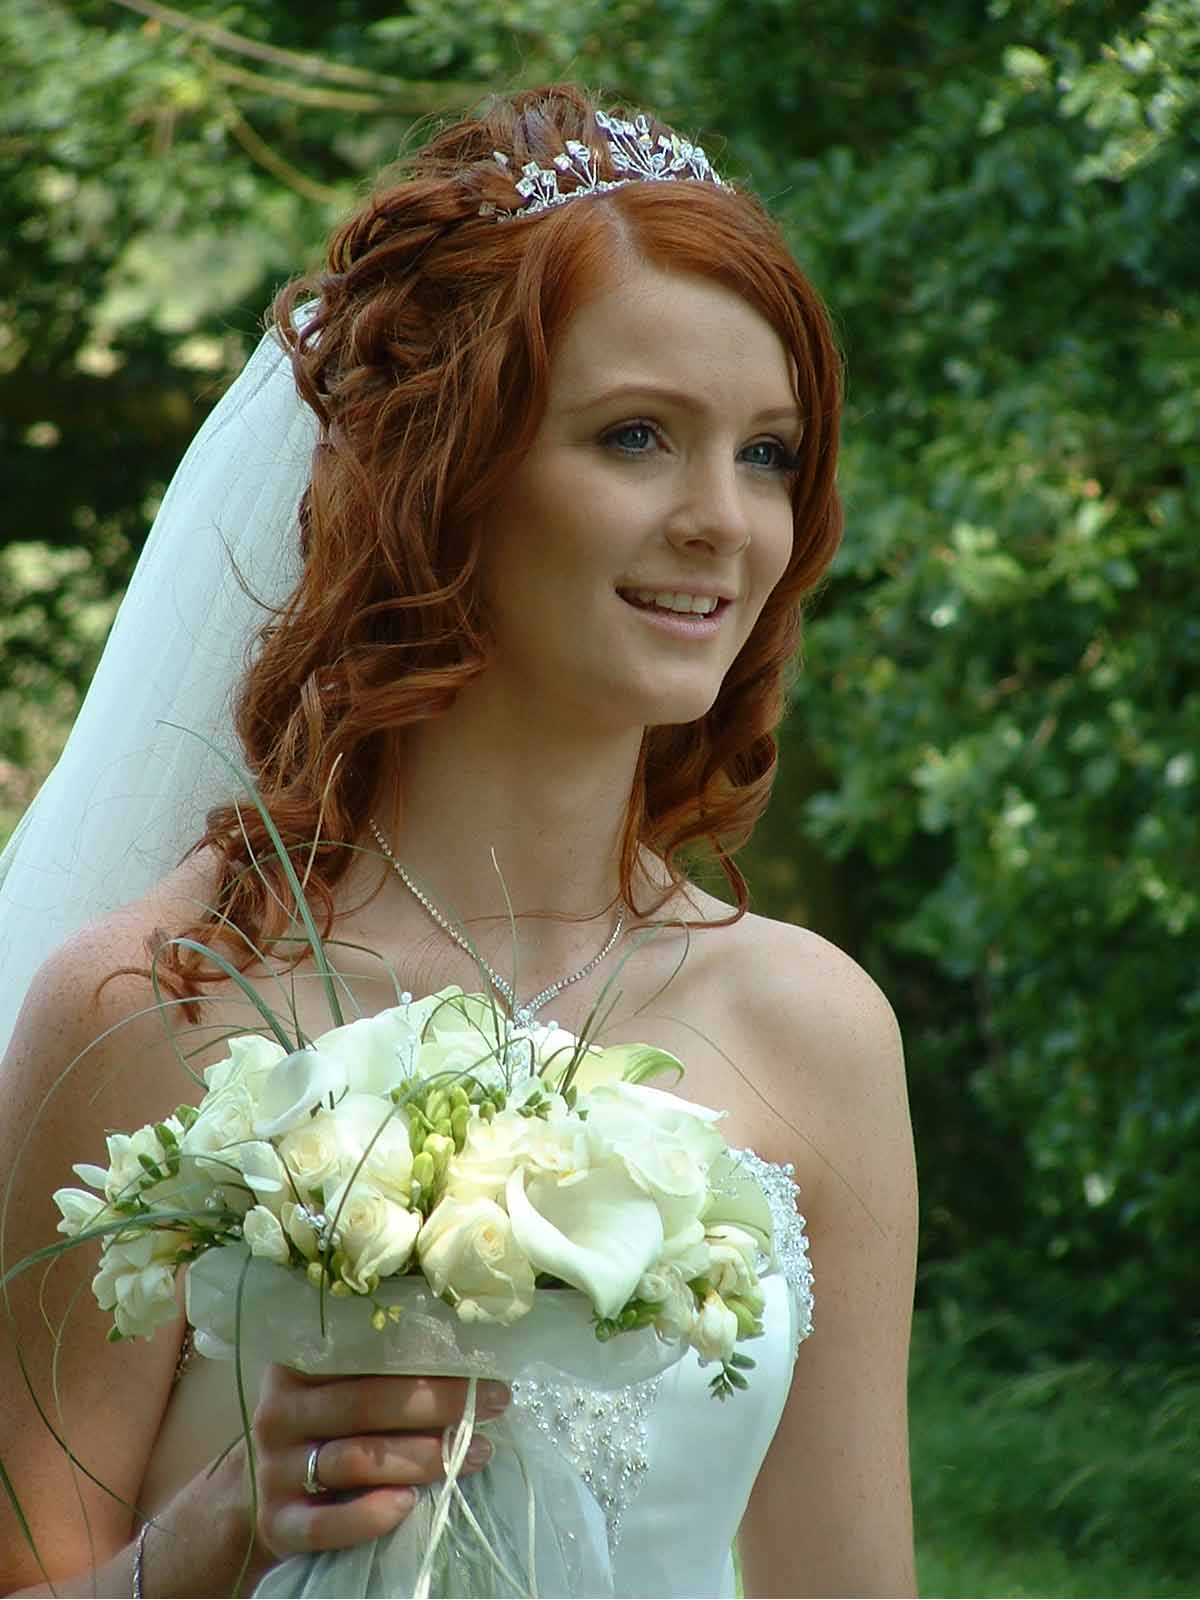 20 Best Curly Wedding Hairstyles Ideas - The Xerxes
 Long Hairstyles With Curls Wedding